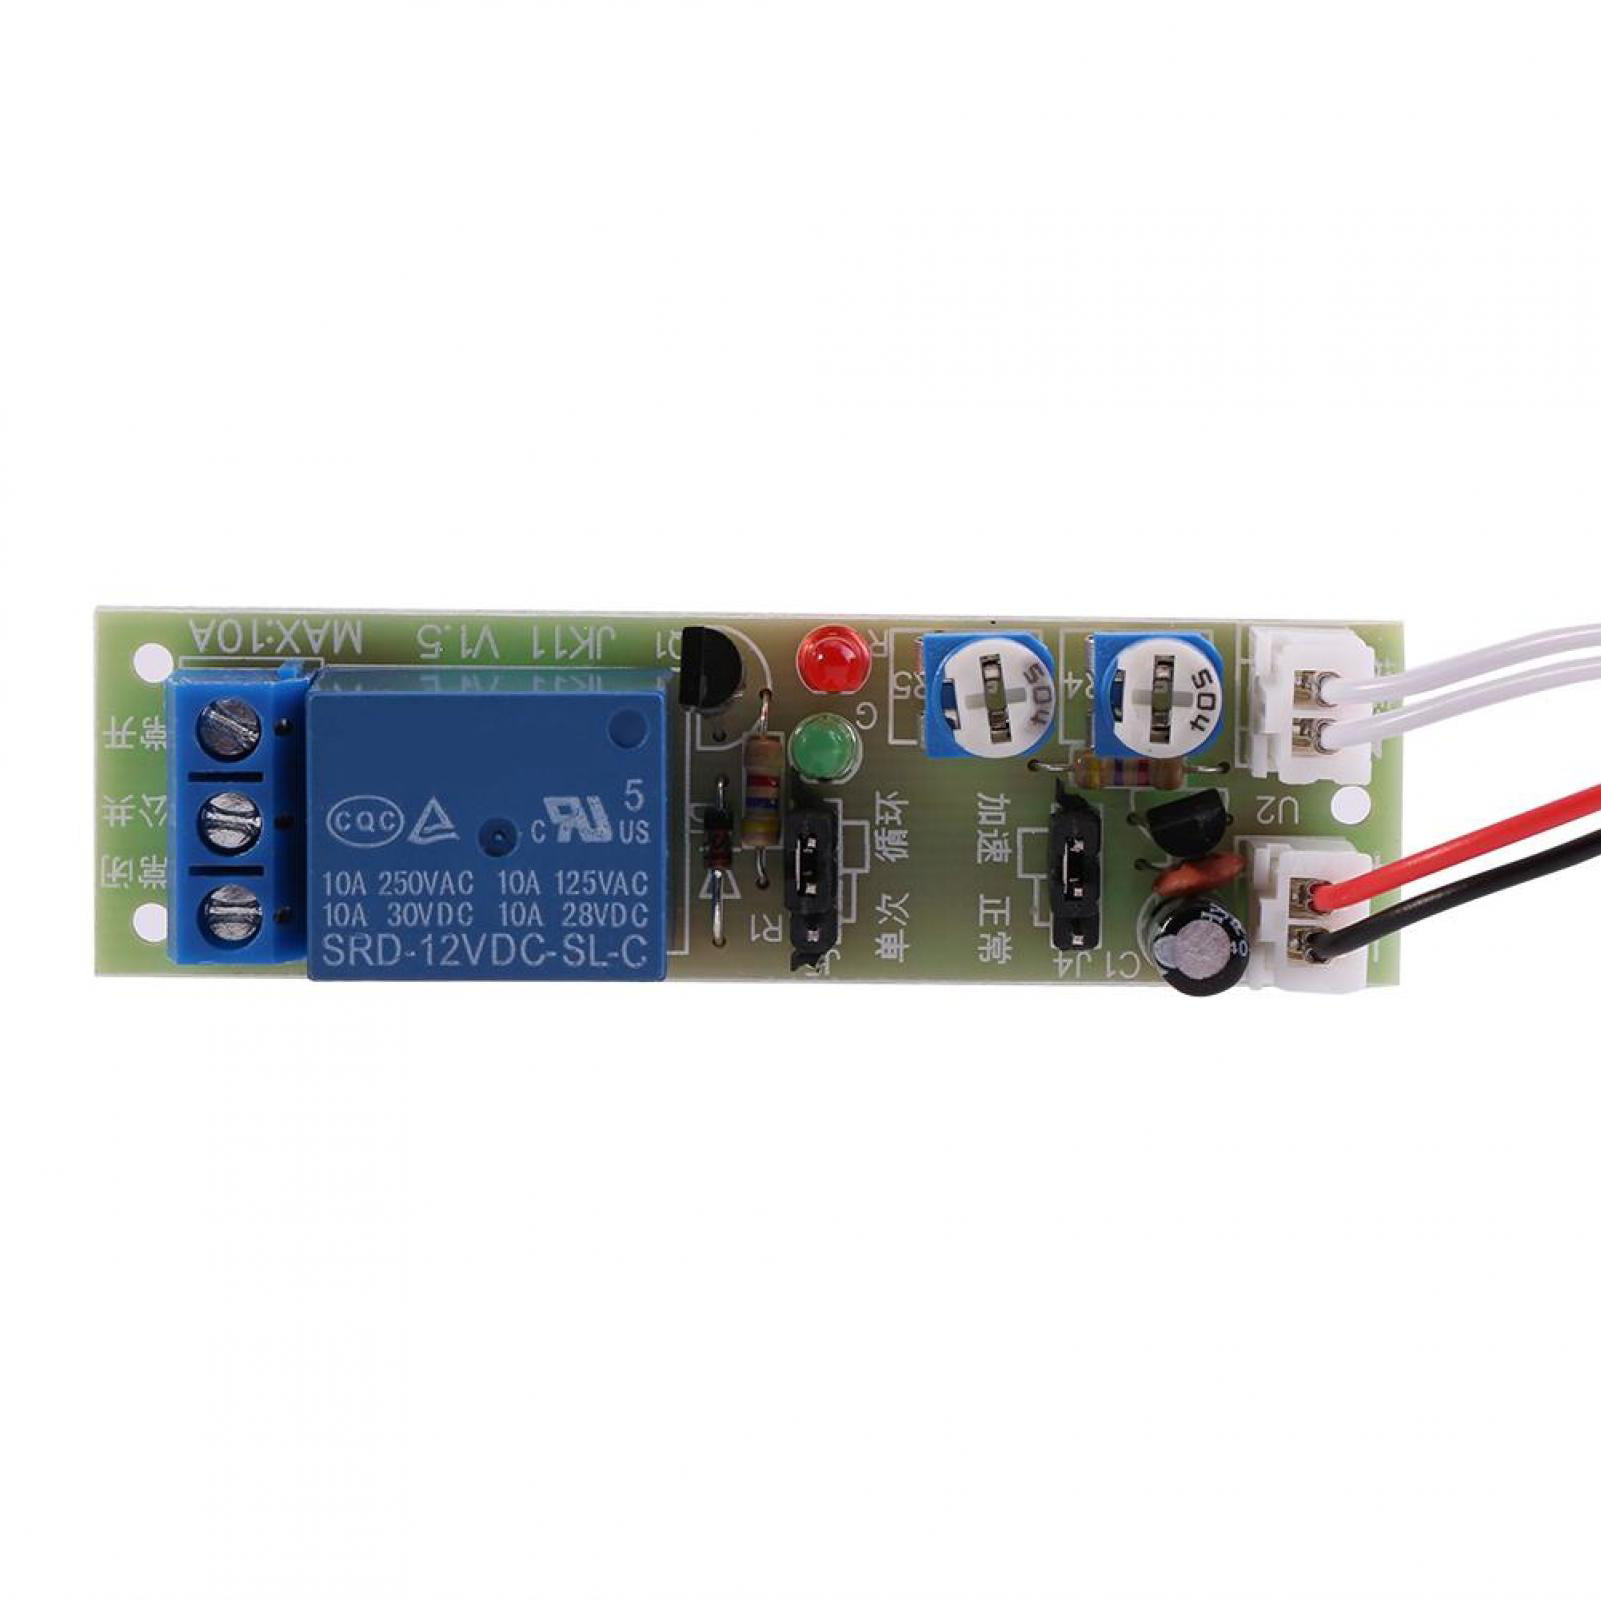 Details about   5V 12V 24V Infinite Cycle Delay Time Timer Relay Turn ON/OFF Switch Loop Module 